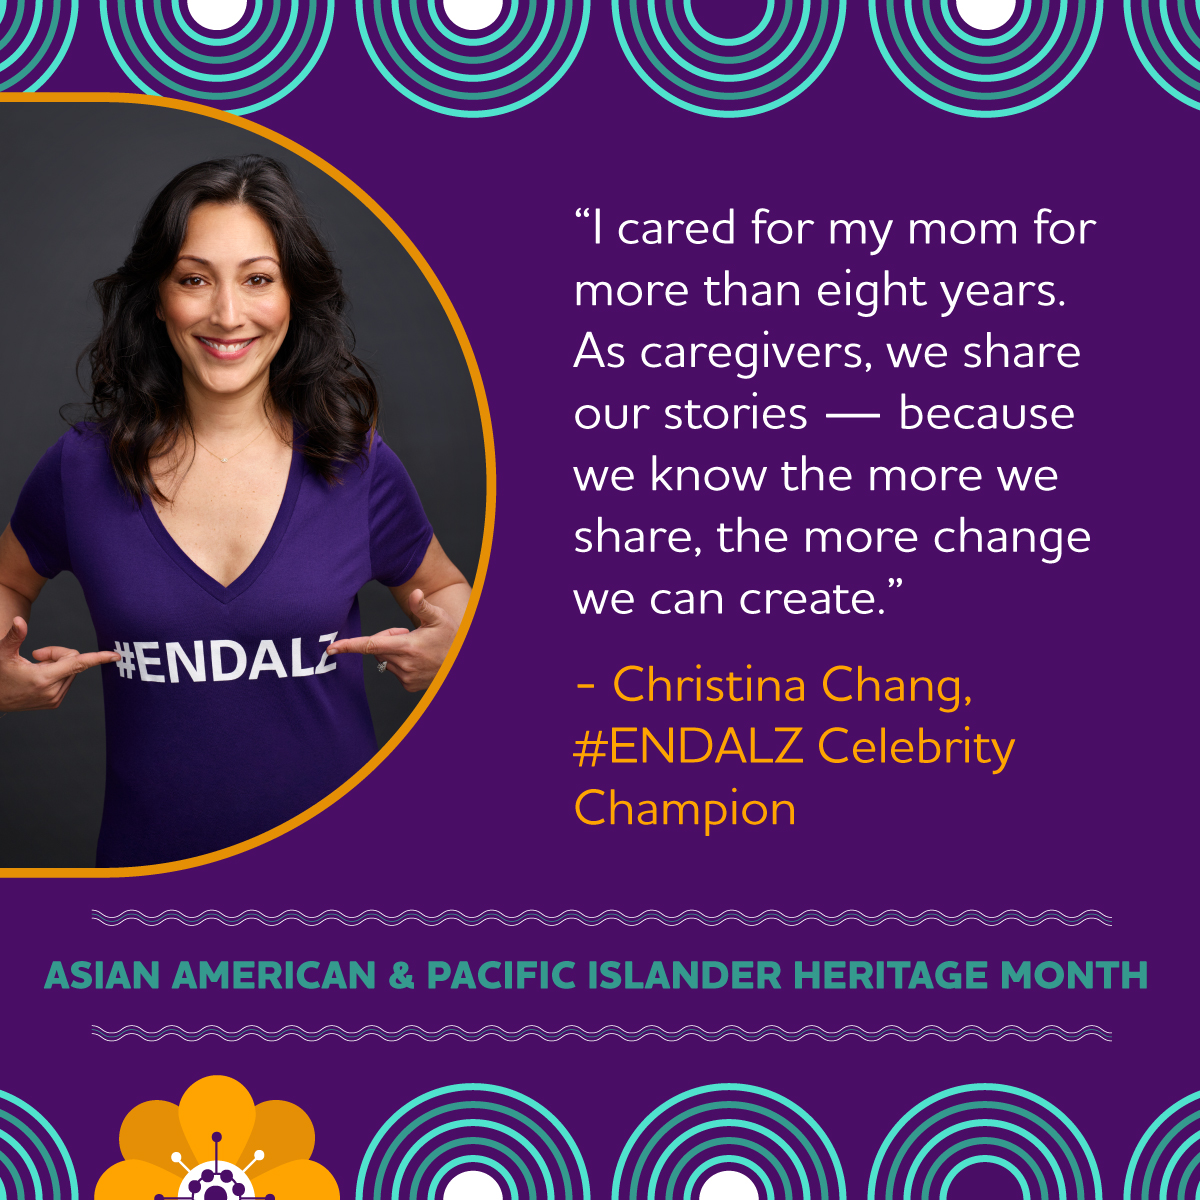 This month, we’re celebrating Asian Americans & Pacific Islanders, like actress and #ENDALZ Celebrity Champion Christina Chang who is passionate about raising Alzheimer’s awareness in honor of her mom and all those impacted. #AAPIMonth